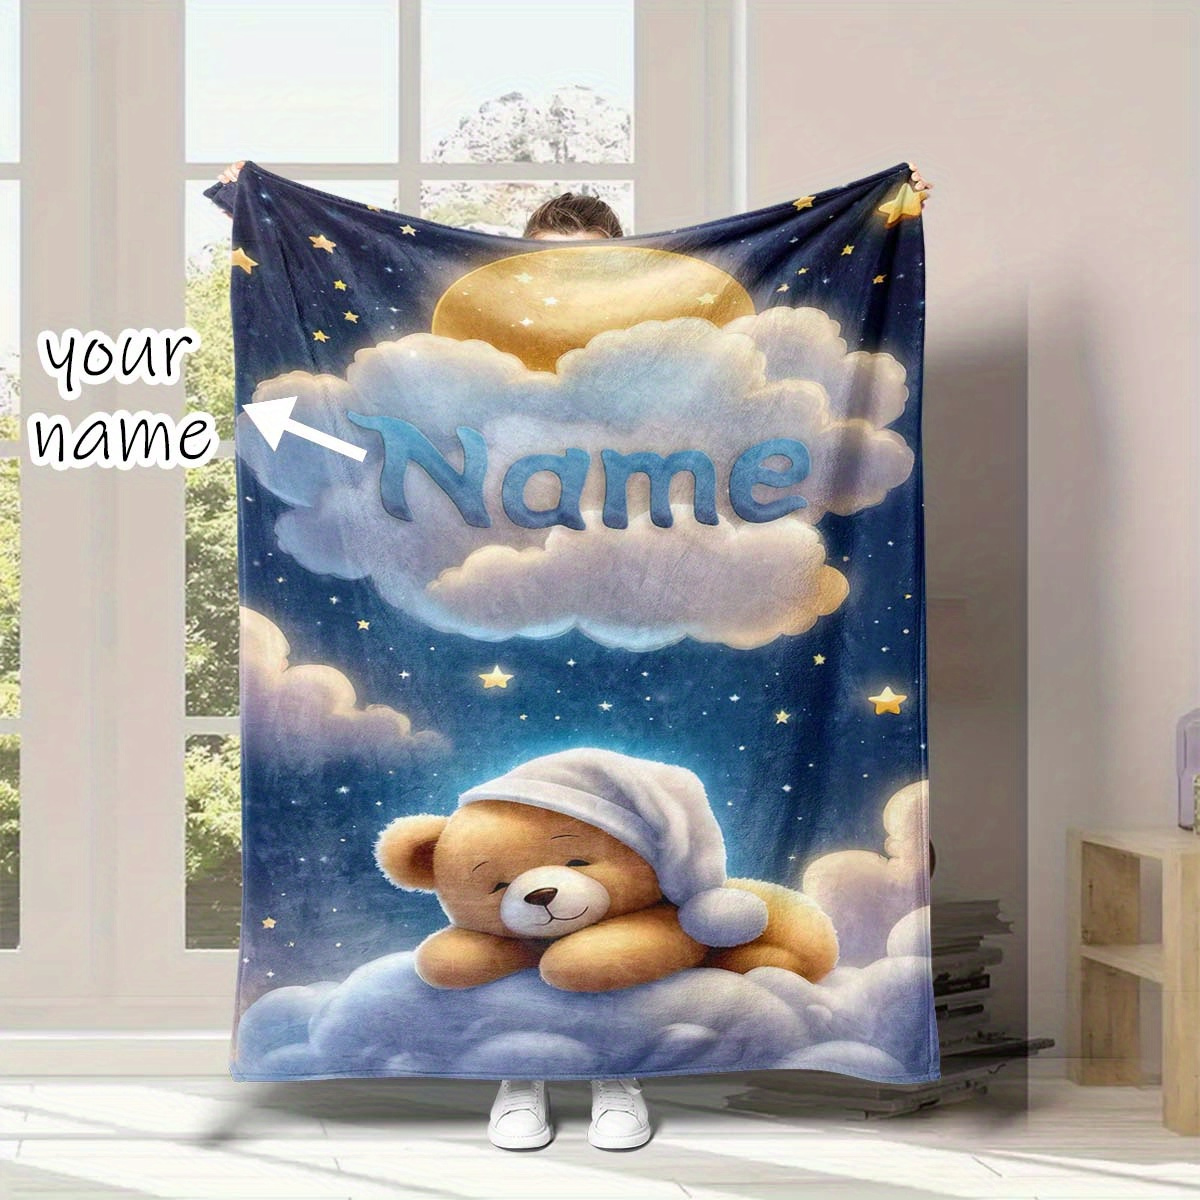 

Custom Dreamy Blue Starry Sky & Sleeping Bear Blanket - Personalized Name, Soft Flannel, Perfect For All Seasons, Ideal Birthday Or Holiday Gift